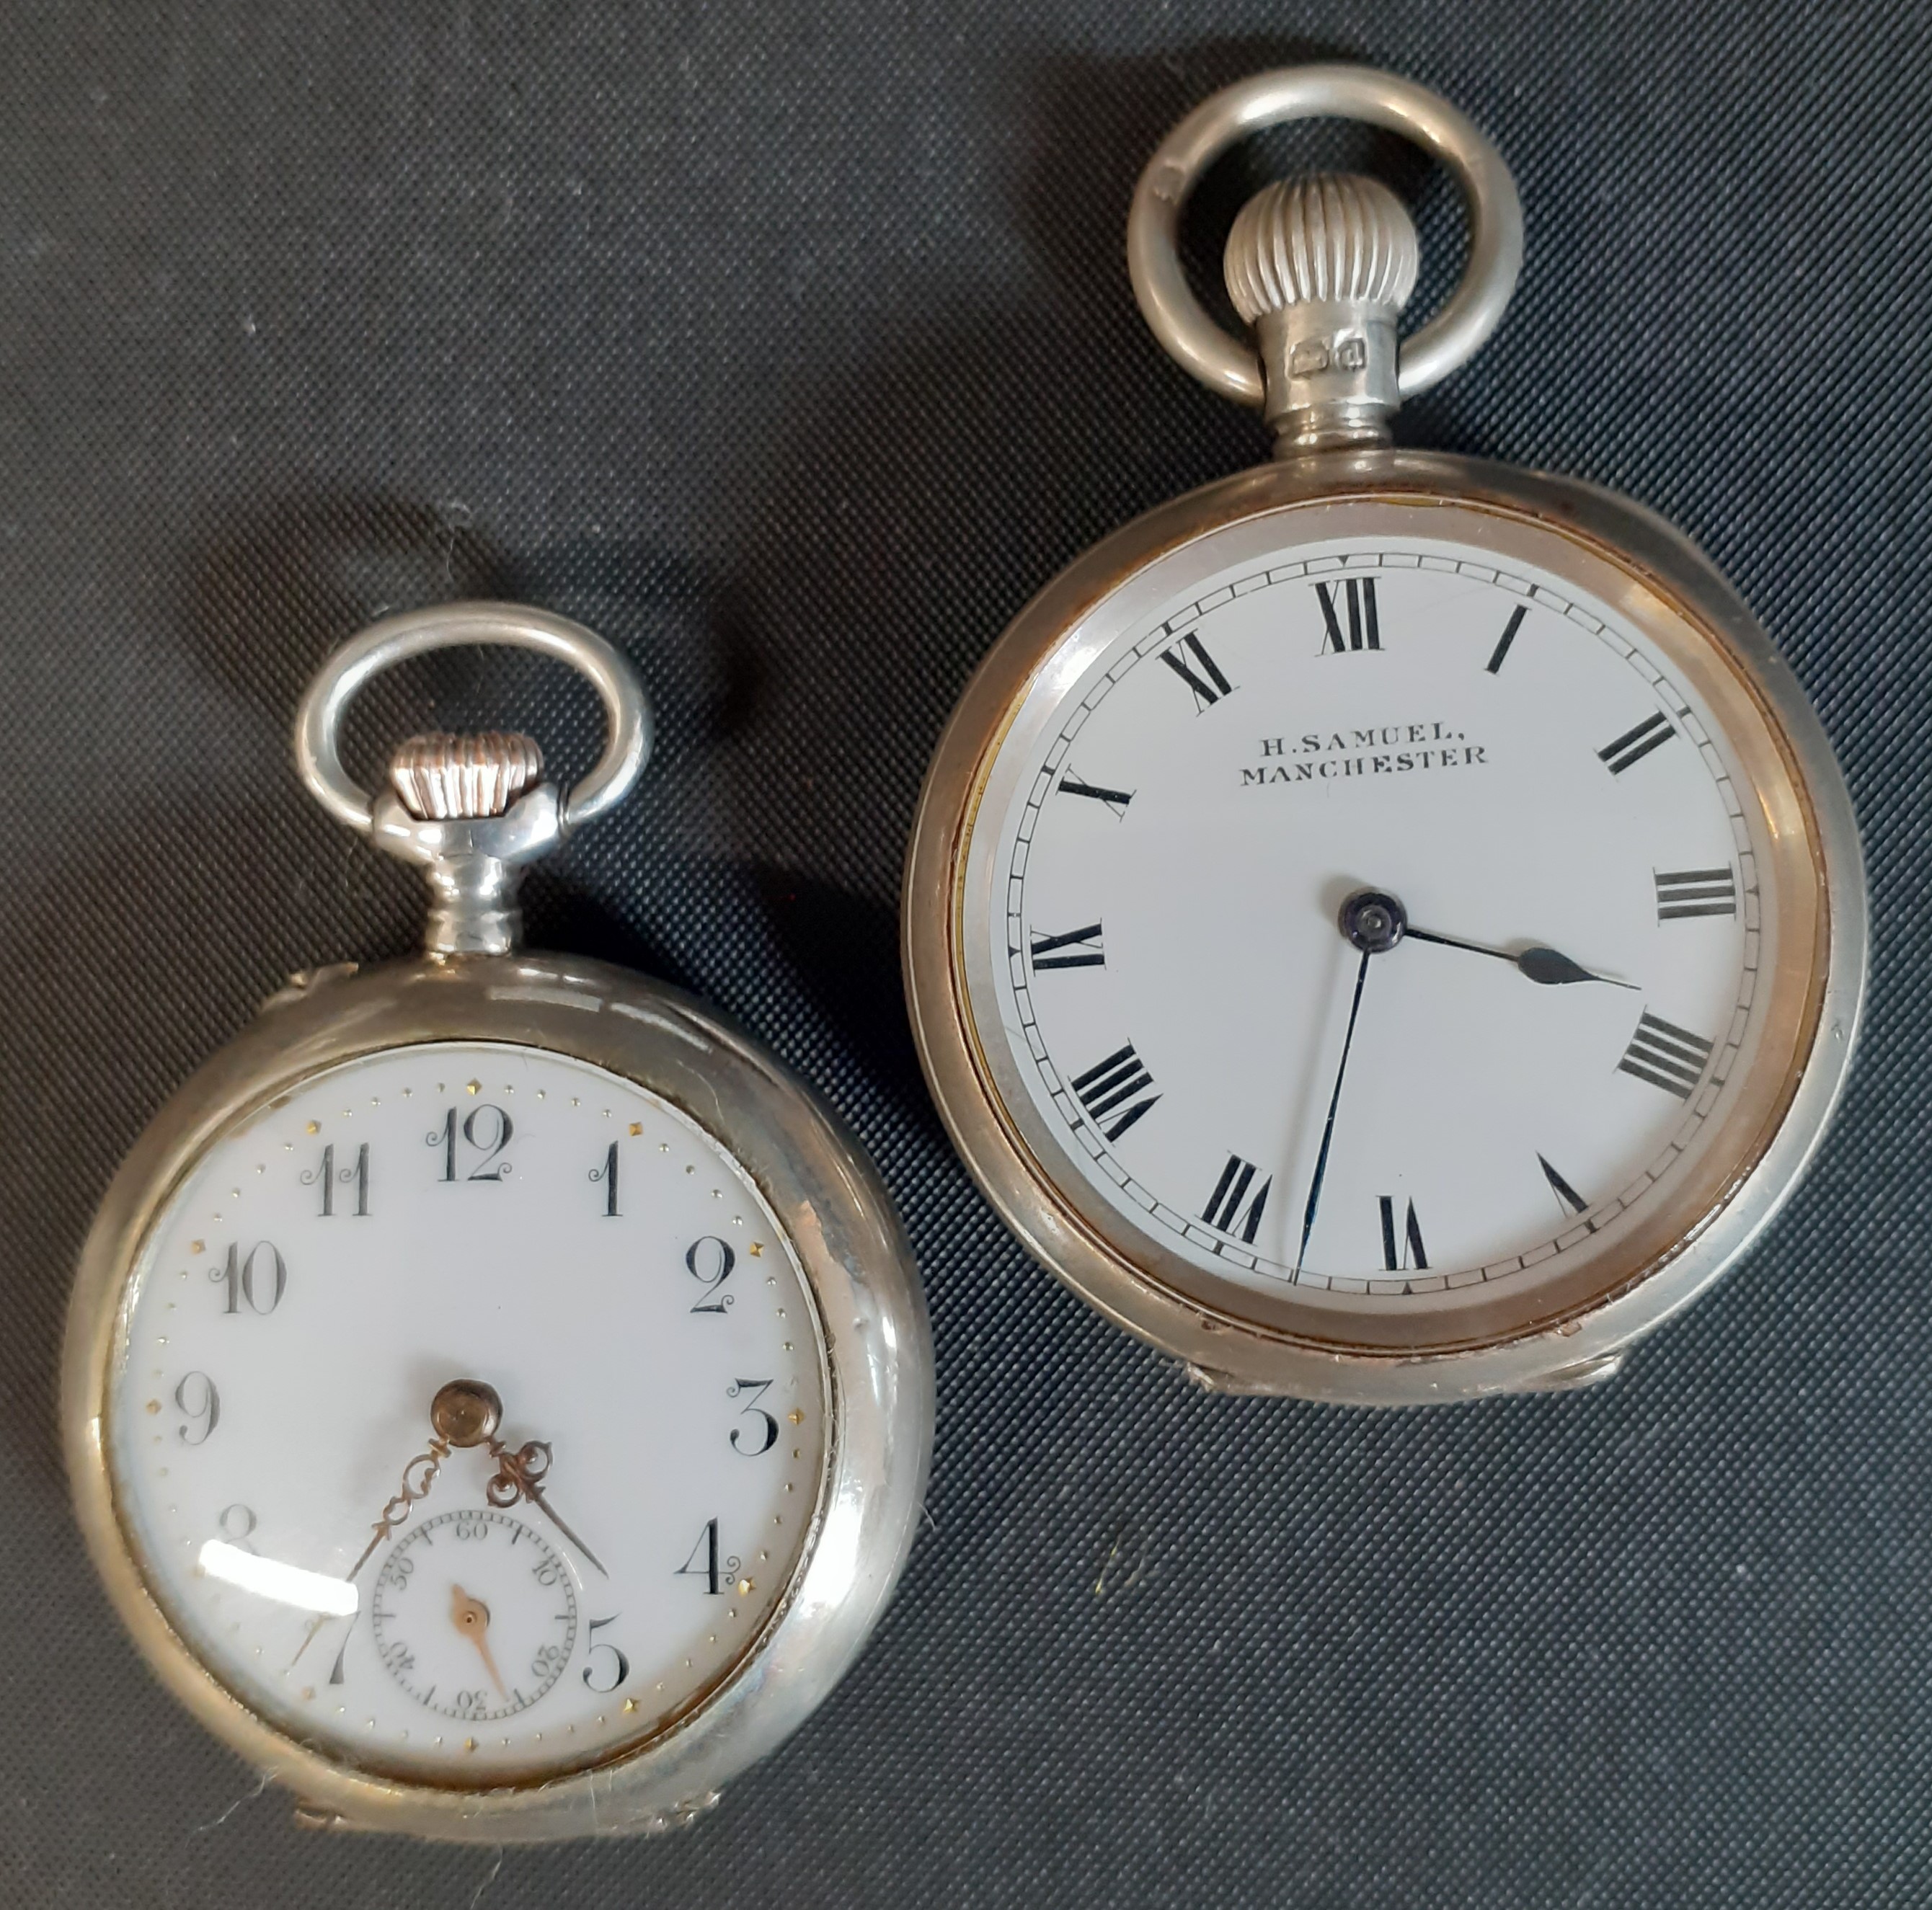 Silver top wind fob watch, Birmingham 1905 with lever escapement (H Samuel Manchester), Alpina white - Image 2 of 2